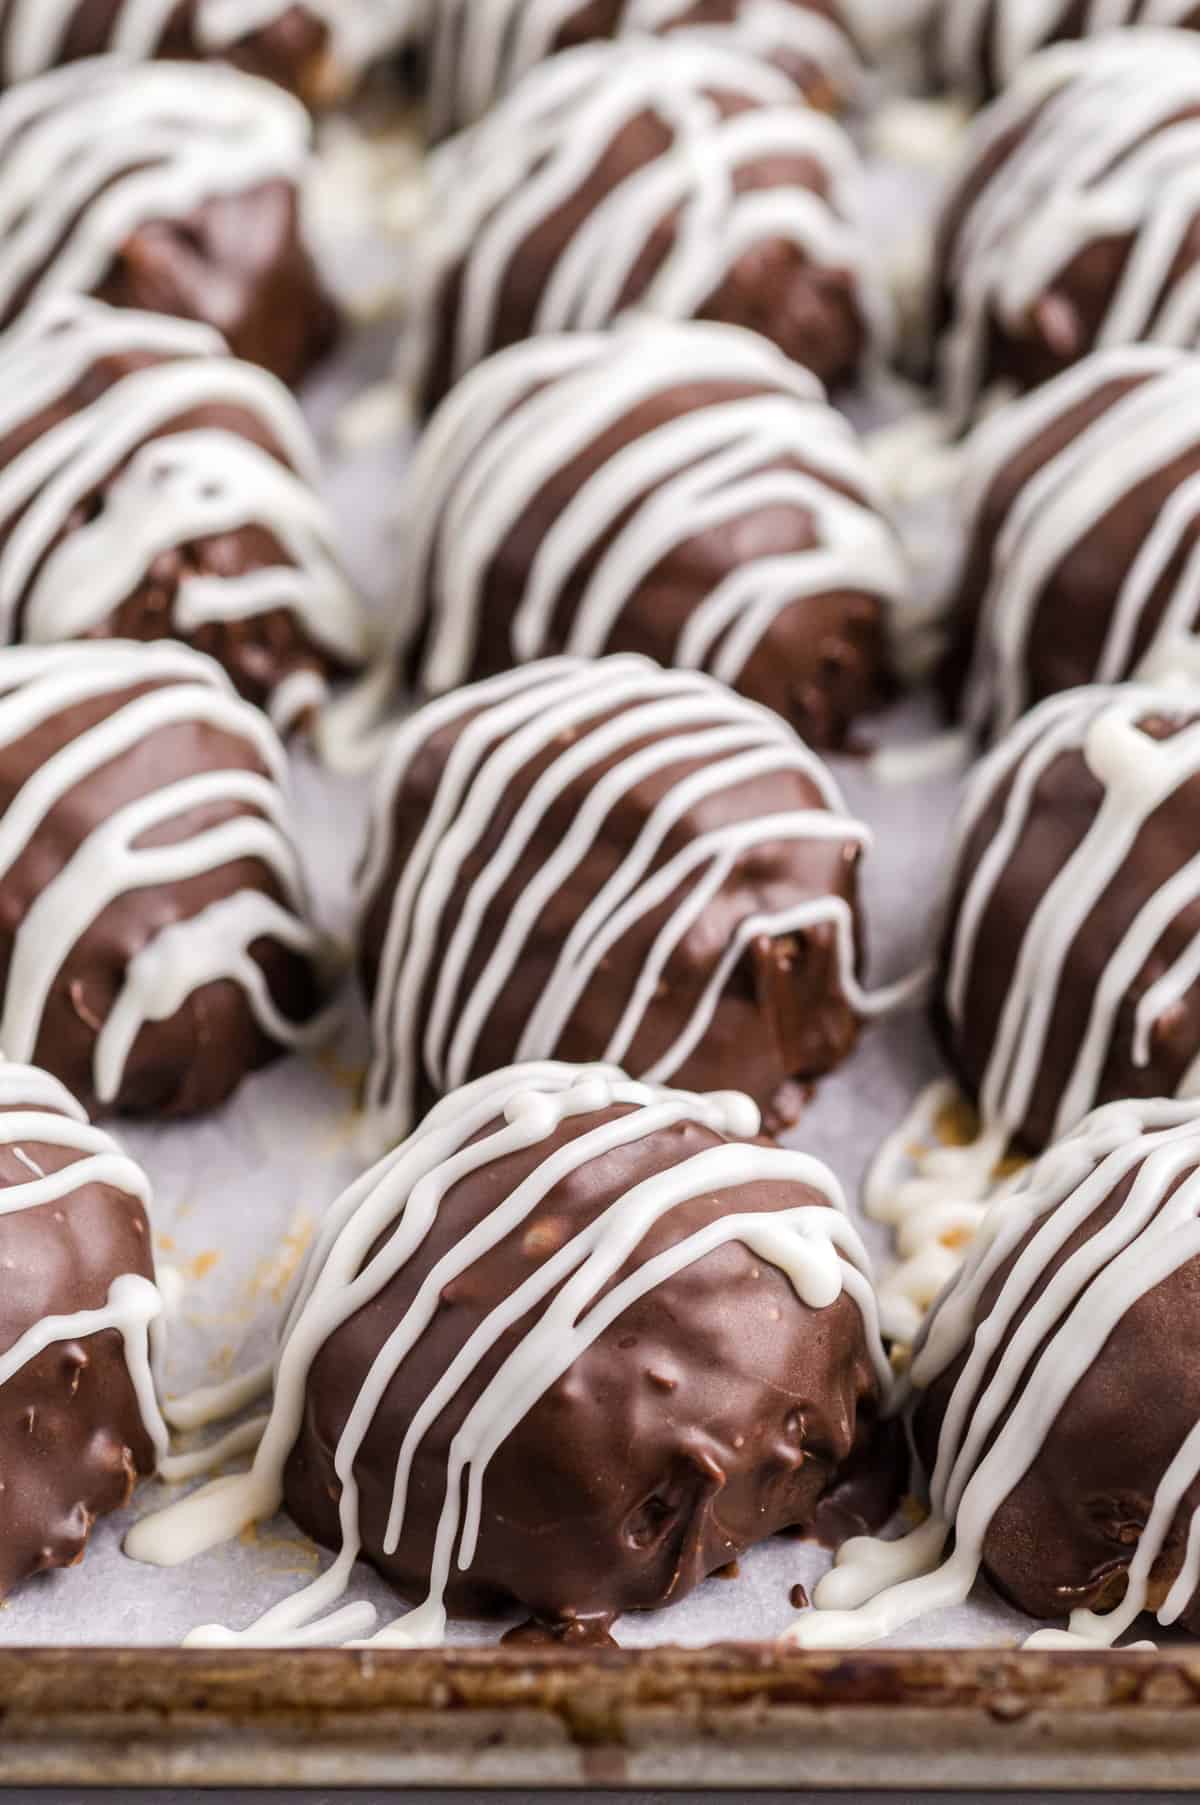 Chocolate Rice Krispies Peanut Butter Balls drizzles with white chocolate on lined baking sheet 